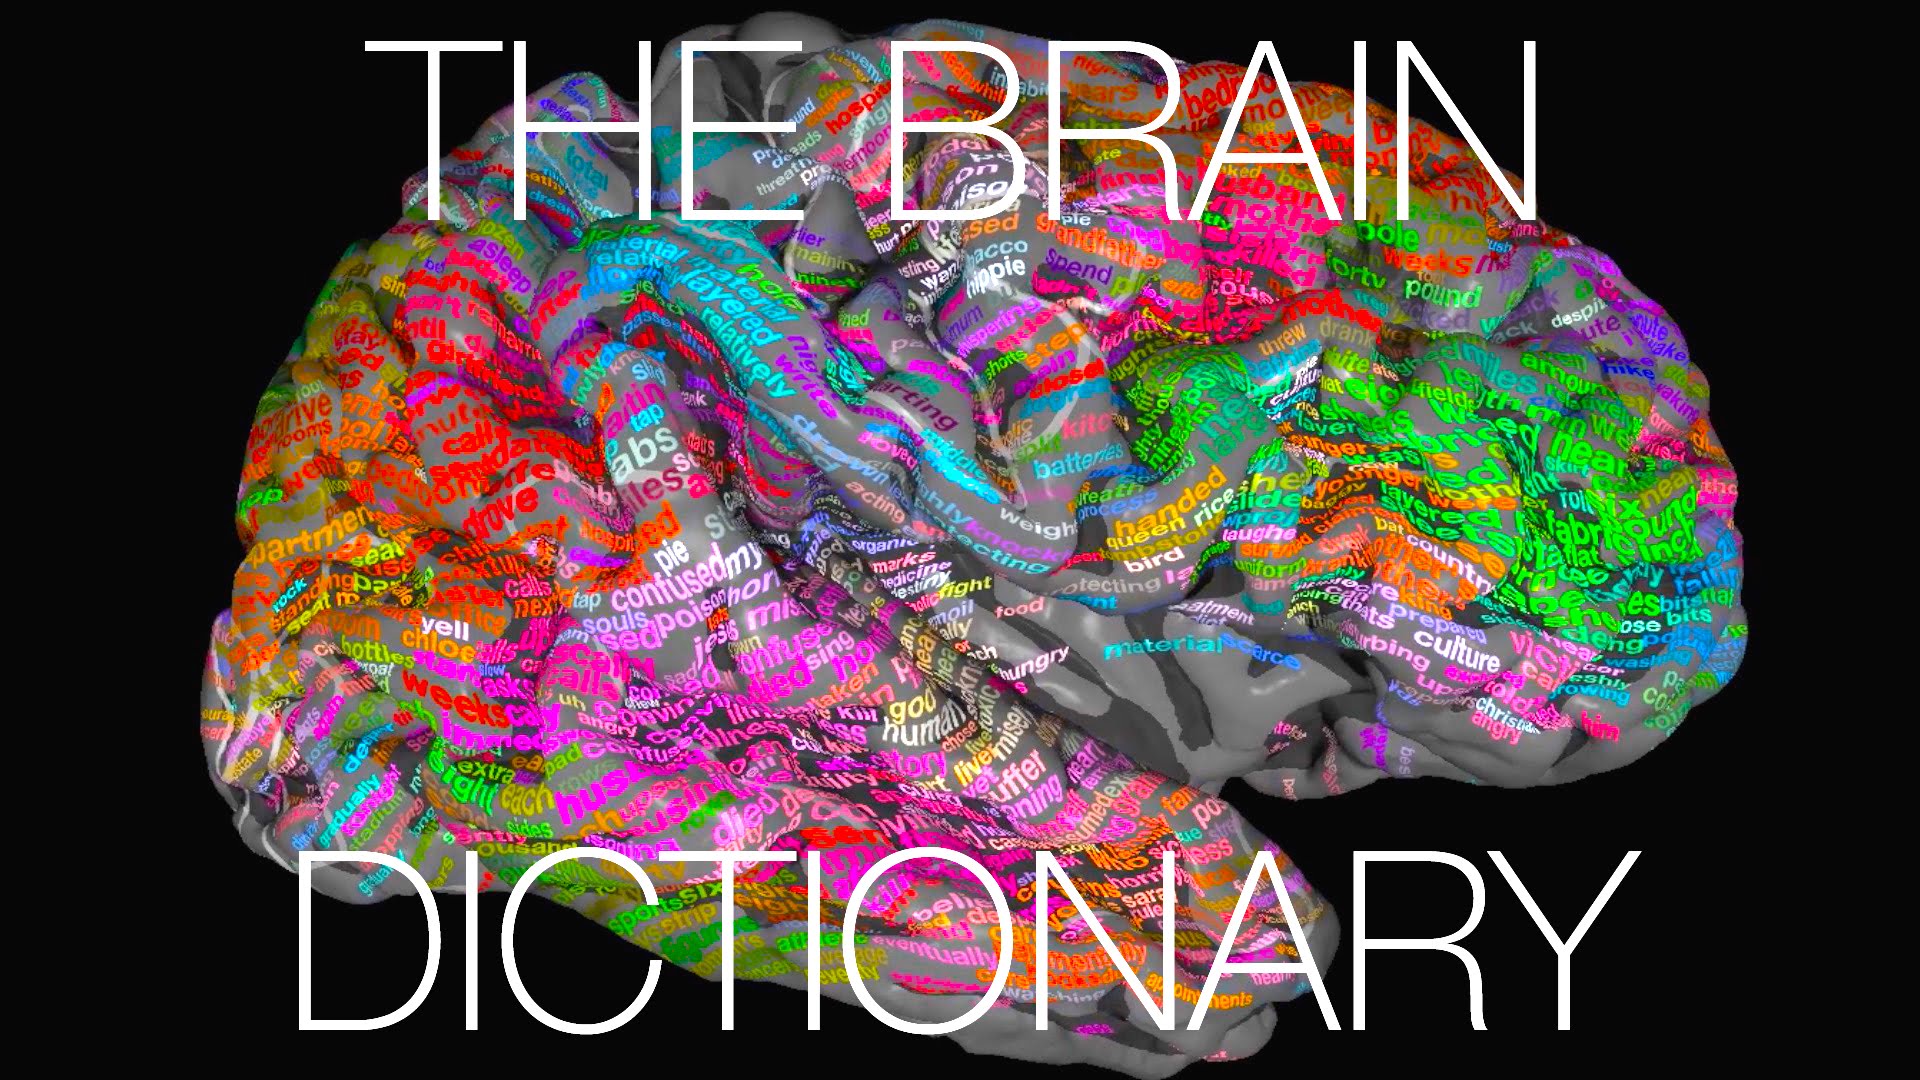 A new atlas of brain shows the where we store our words2